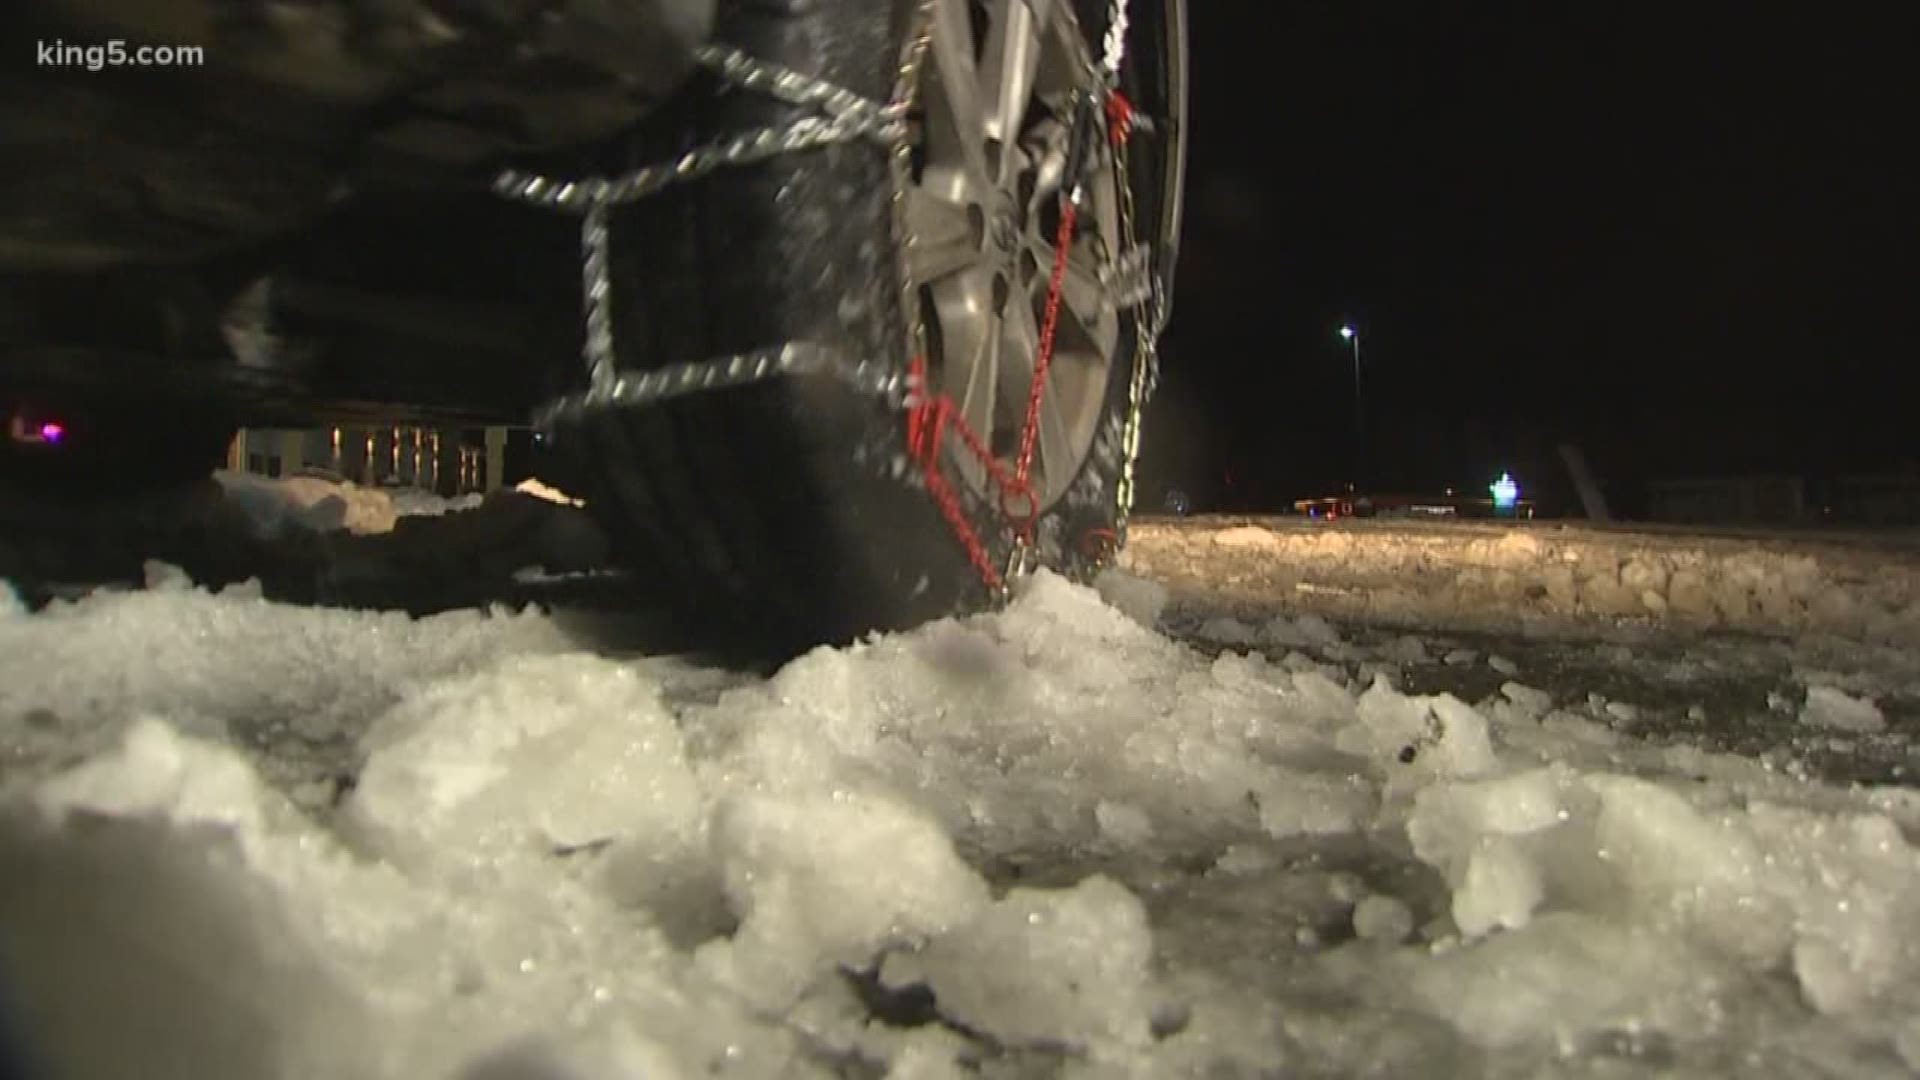 KING 5's Vanessa Misciagna is from New England, where tire chains aren't used. She tries to put chains on for the first time and offers tips for other first-timers